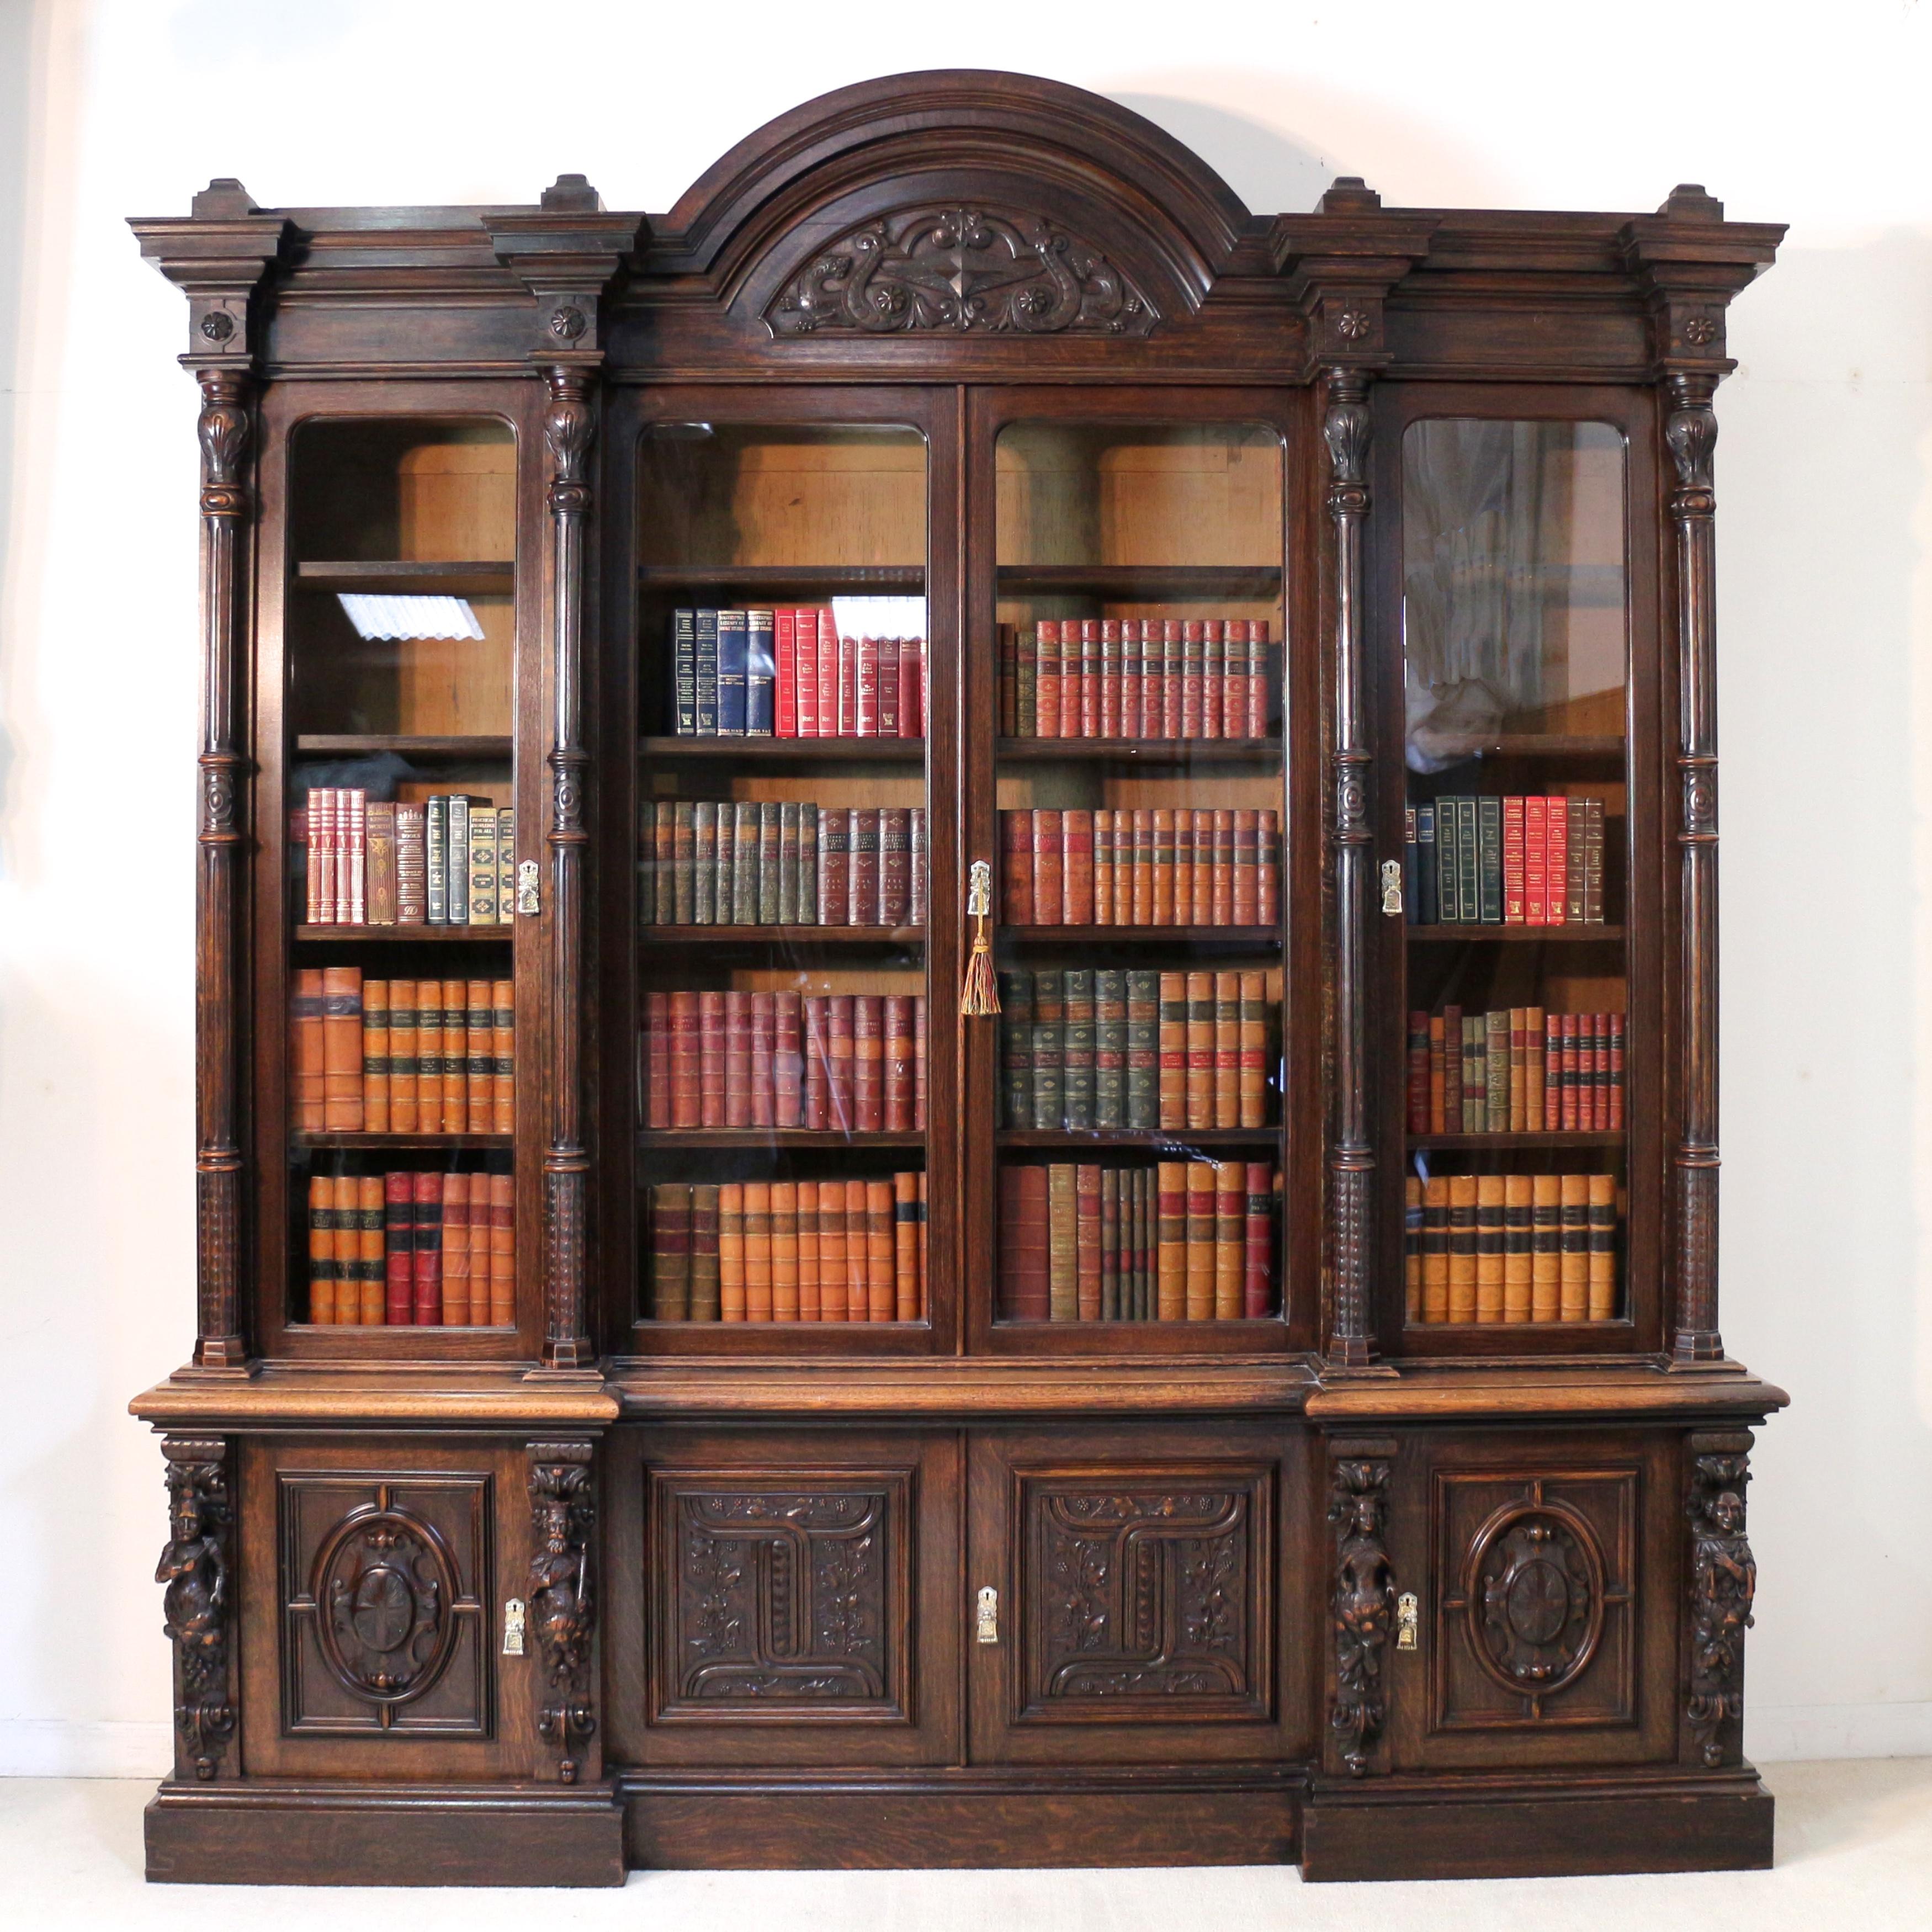 A magnificent Victorian carved oak Elizabethan Revival four door inverted breakfront bookcase dating to circa 1880. With slightly domed square finals to the pediment and a moulded domed cornice carved with dragons it has four rounded glazed doors